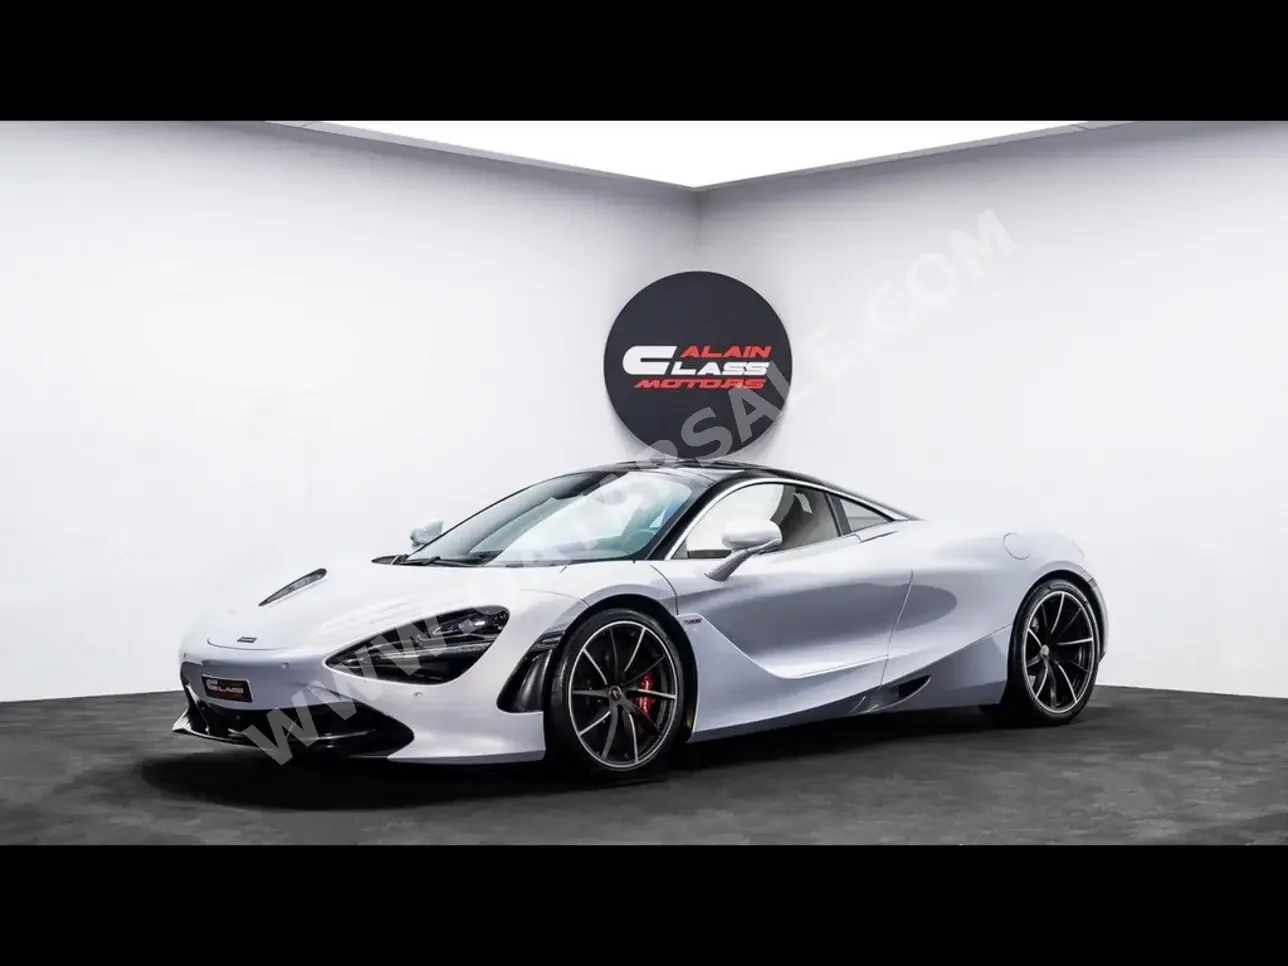 Mclaren  720  S  2018  Automatic  24,989 Km  8 Cylinder  Rear Wheel Drive (RWD)  Coupe / Sport  White